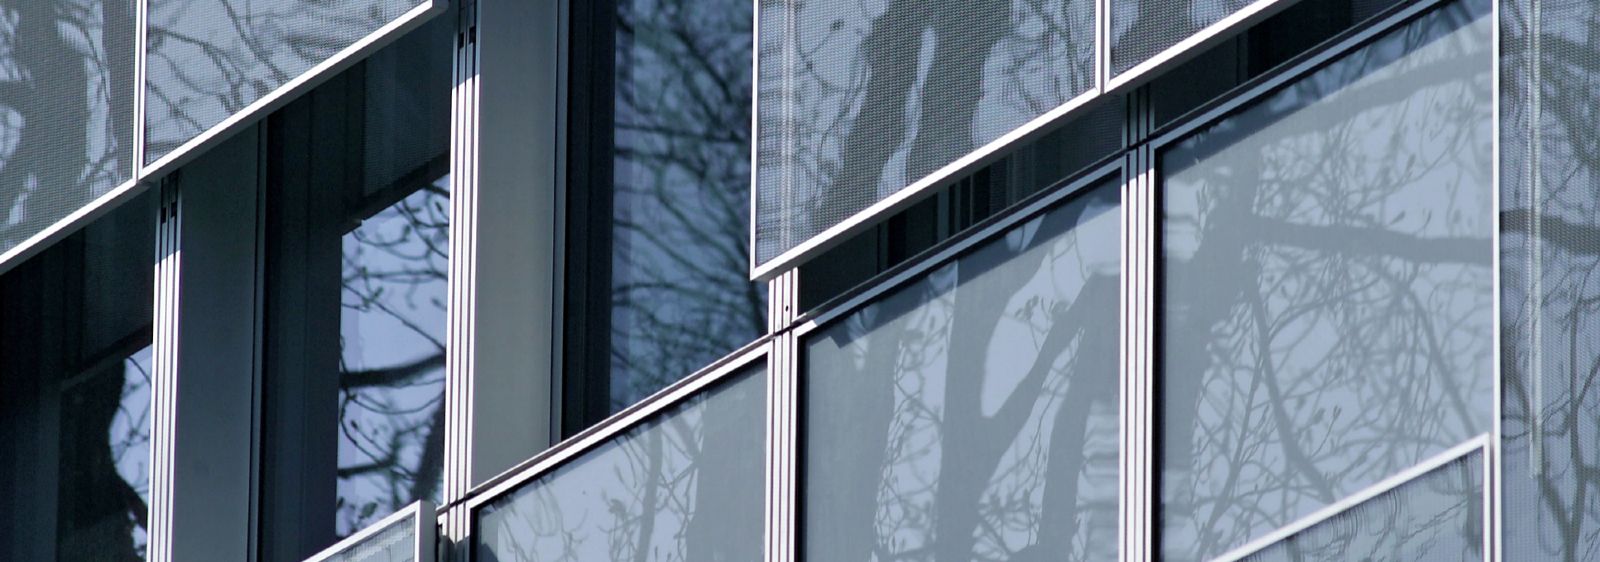 Detail of the new facade with movable parapet elements made of glass expanded metal as sun protection.